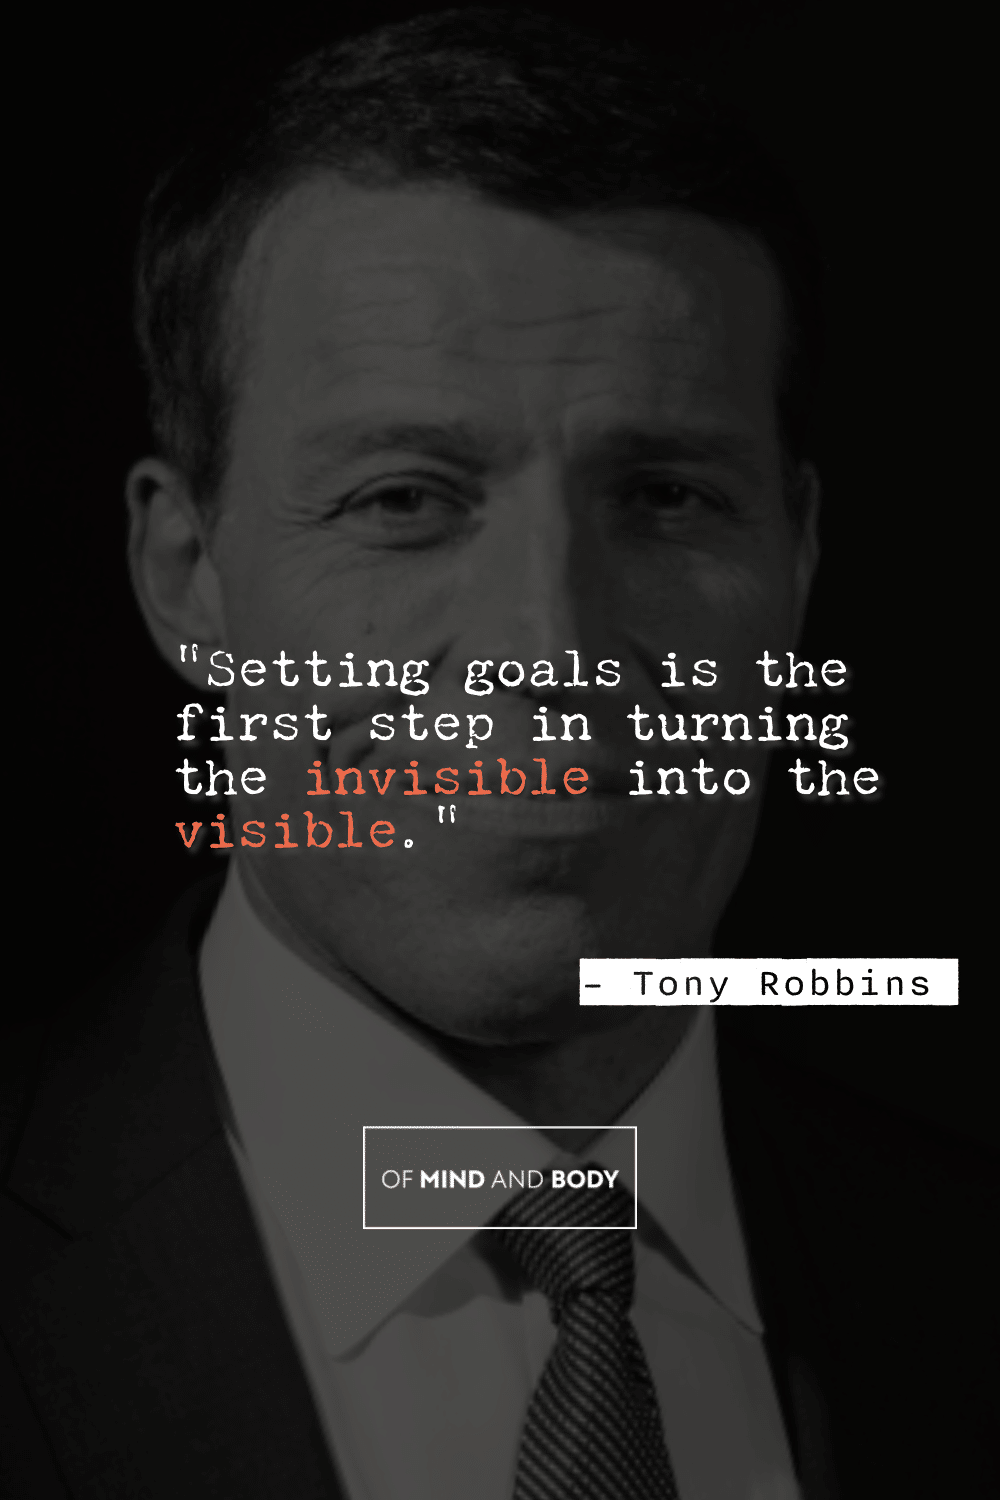 Quotes on Self Improvement - "Setting goals is the first step in turning the invisible into the visible."